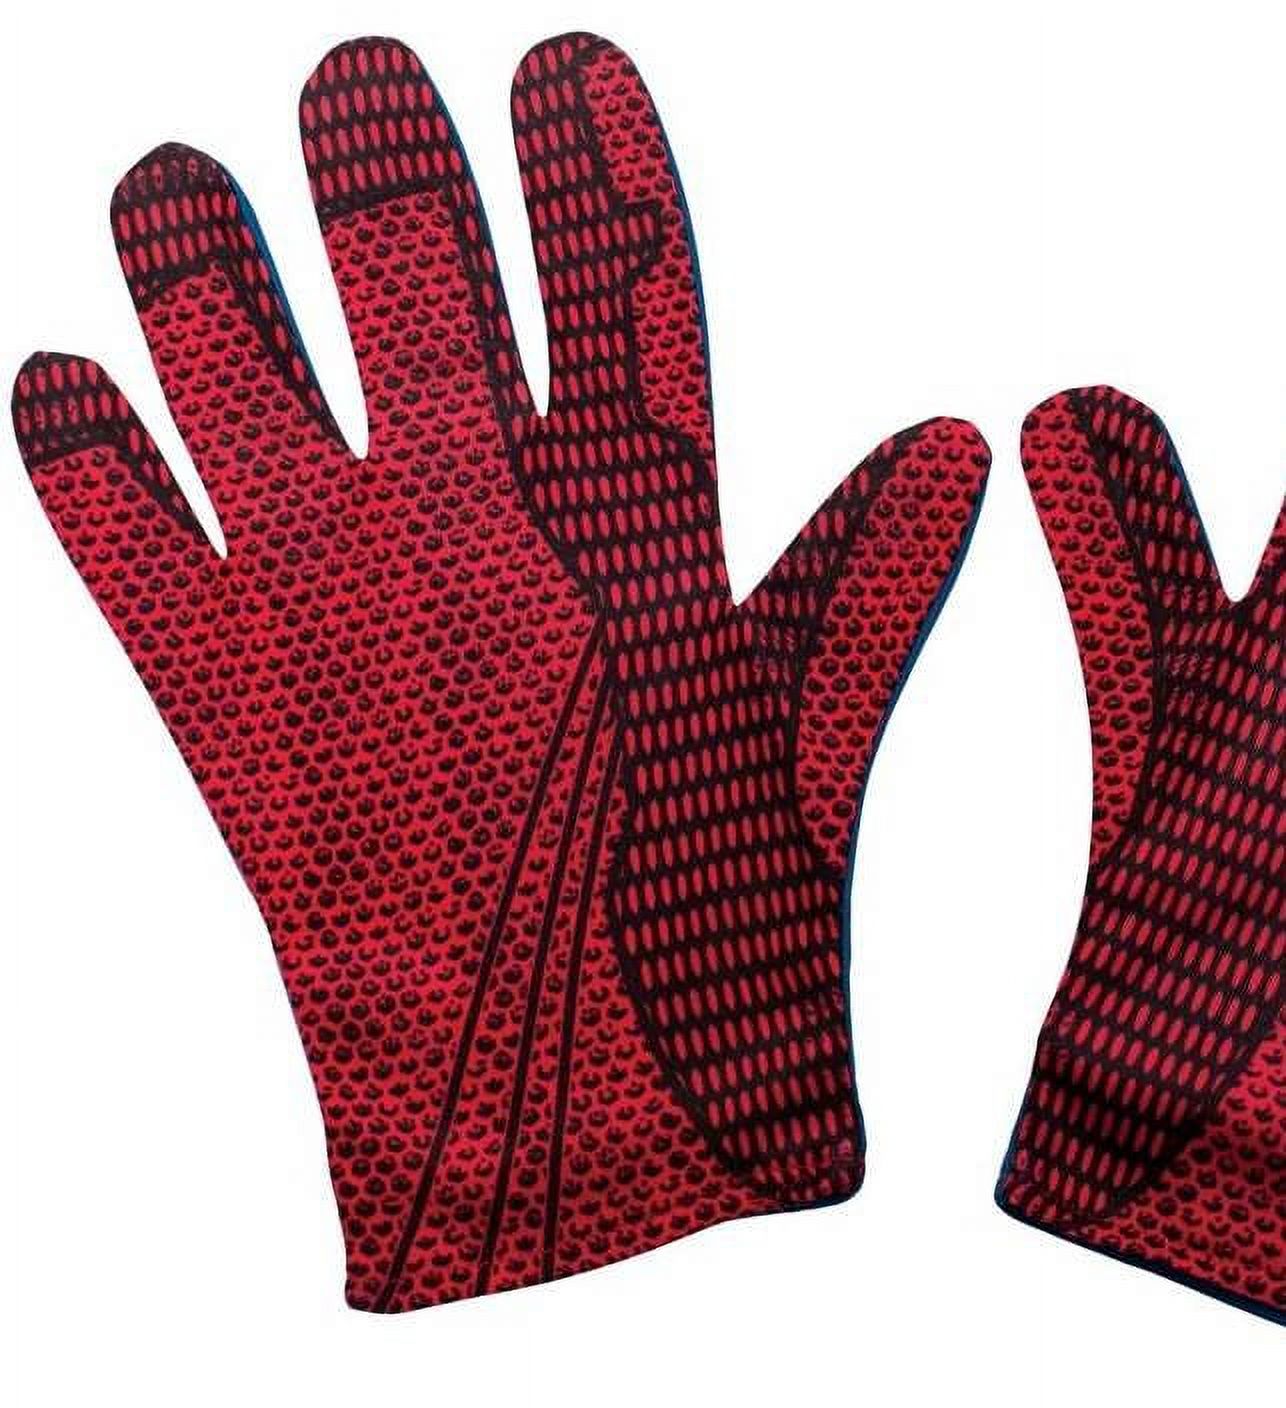 Rubie's Costume Men's The Amazing SpiderMan Adult Gloves, Red, One Size - image 1 of 2